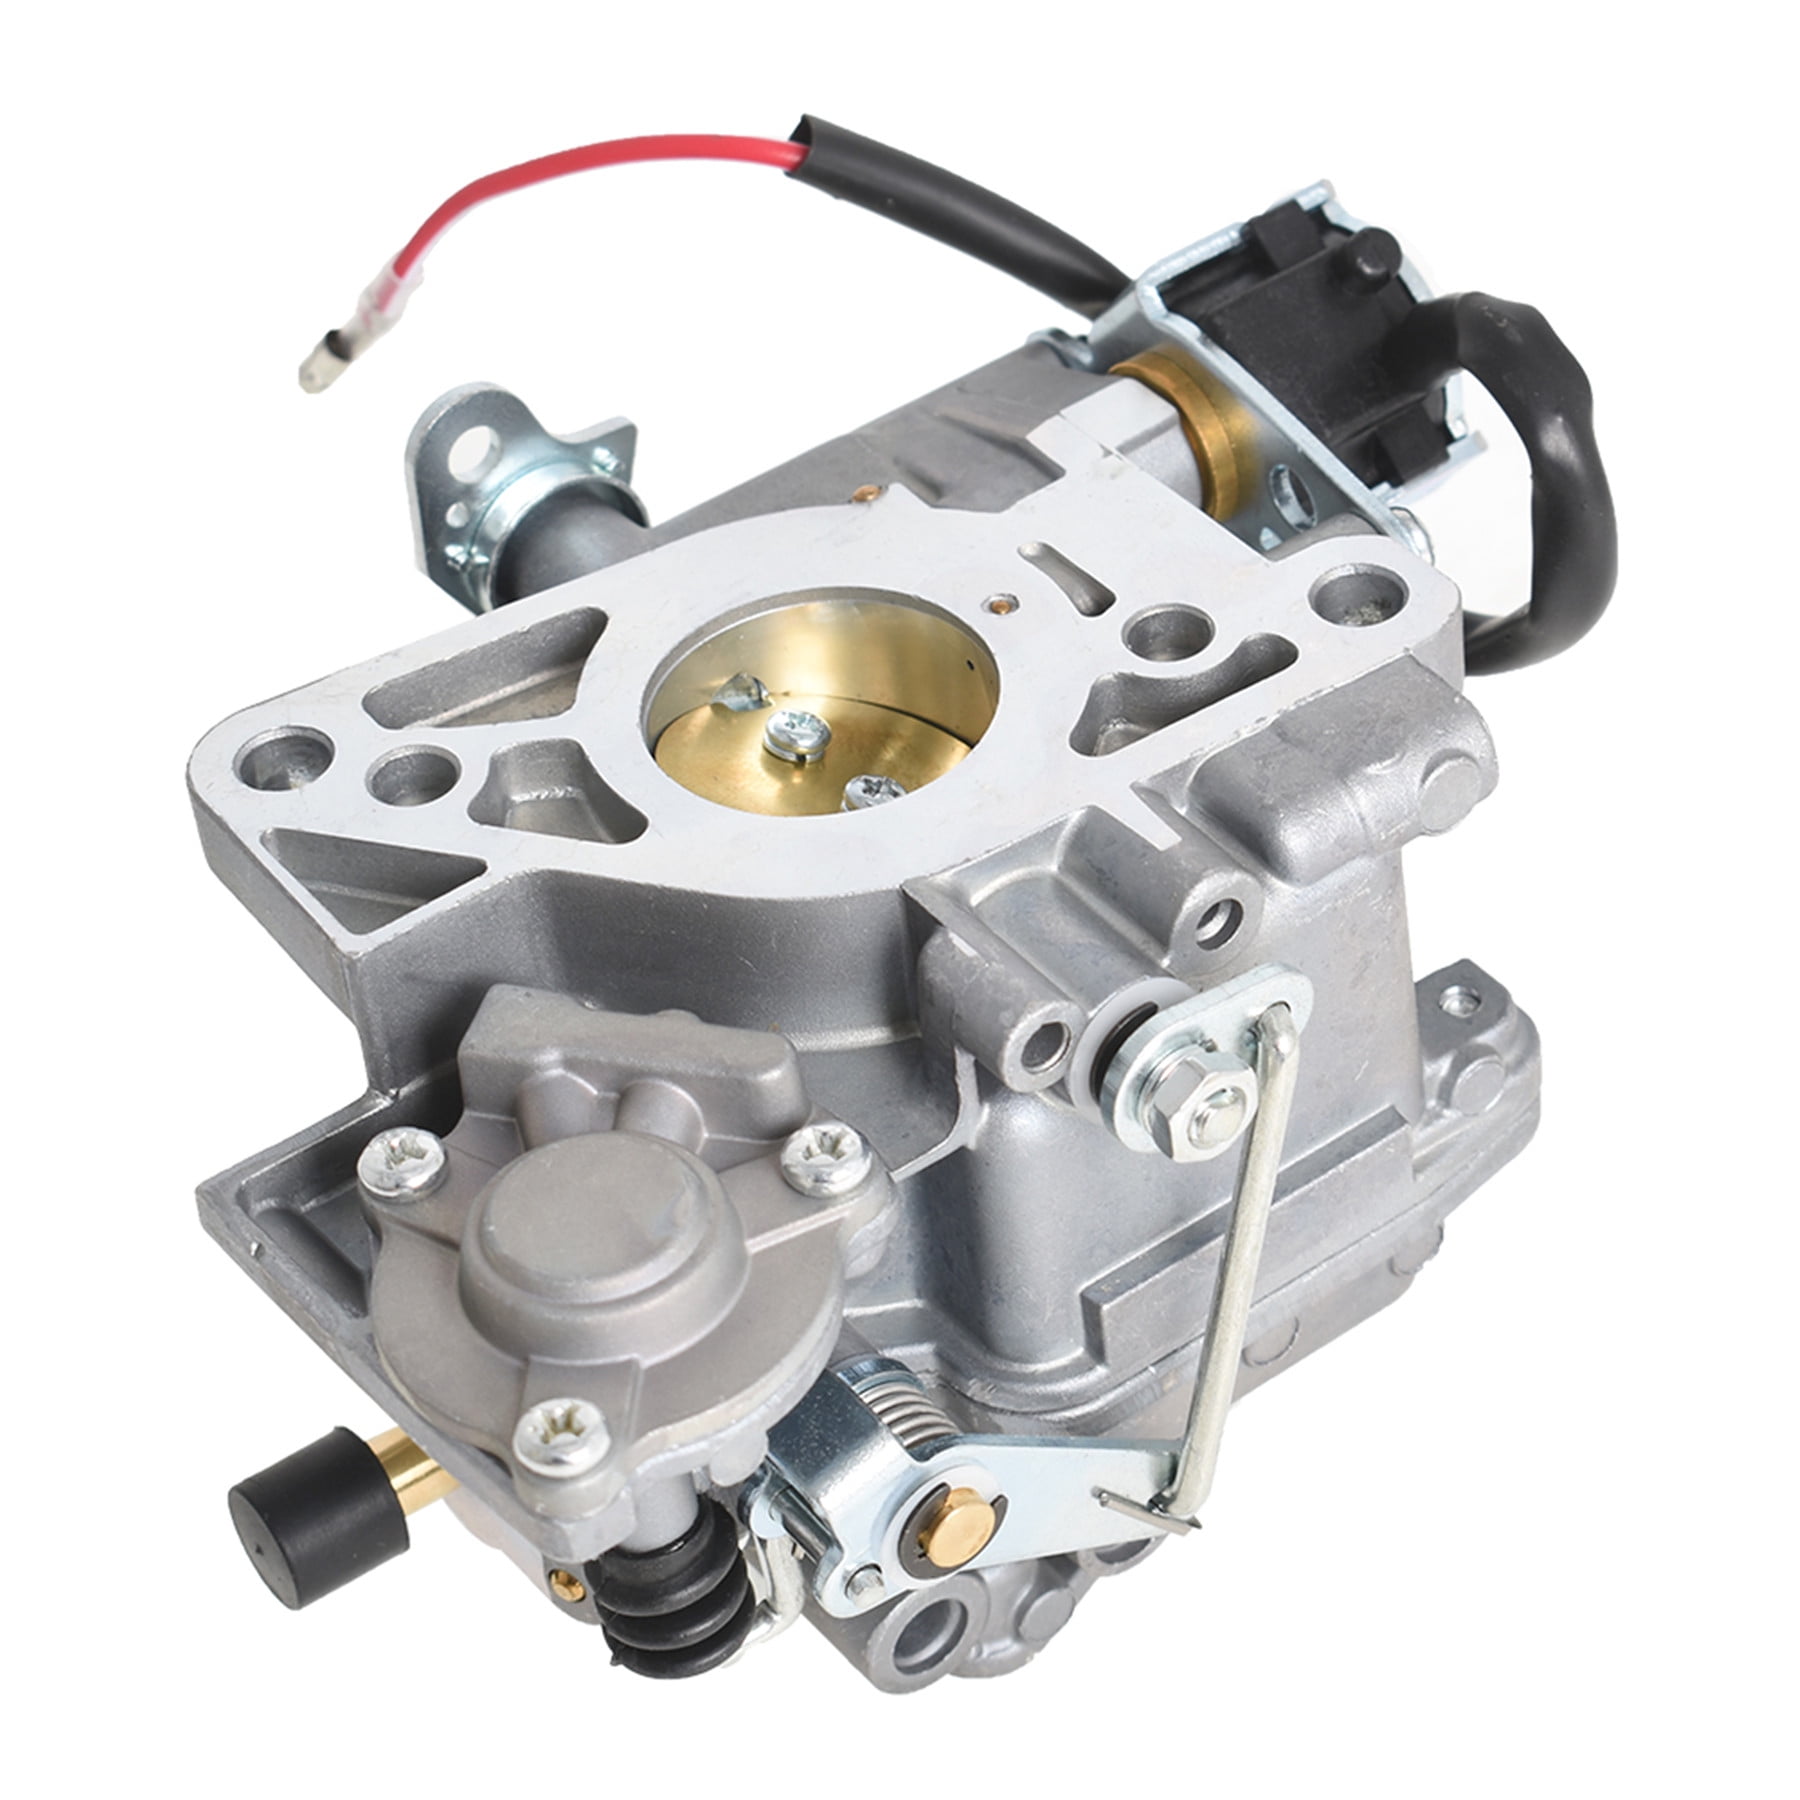 Replacement Carburetor Carb Fit For Kohler CH18 CH20 CH640 18-20.5HP  2485335-S 絶妙なデザイン